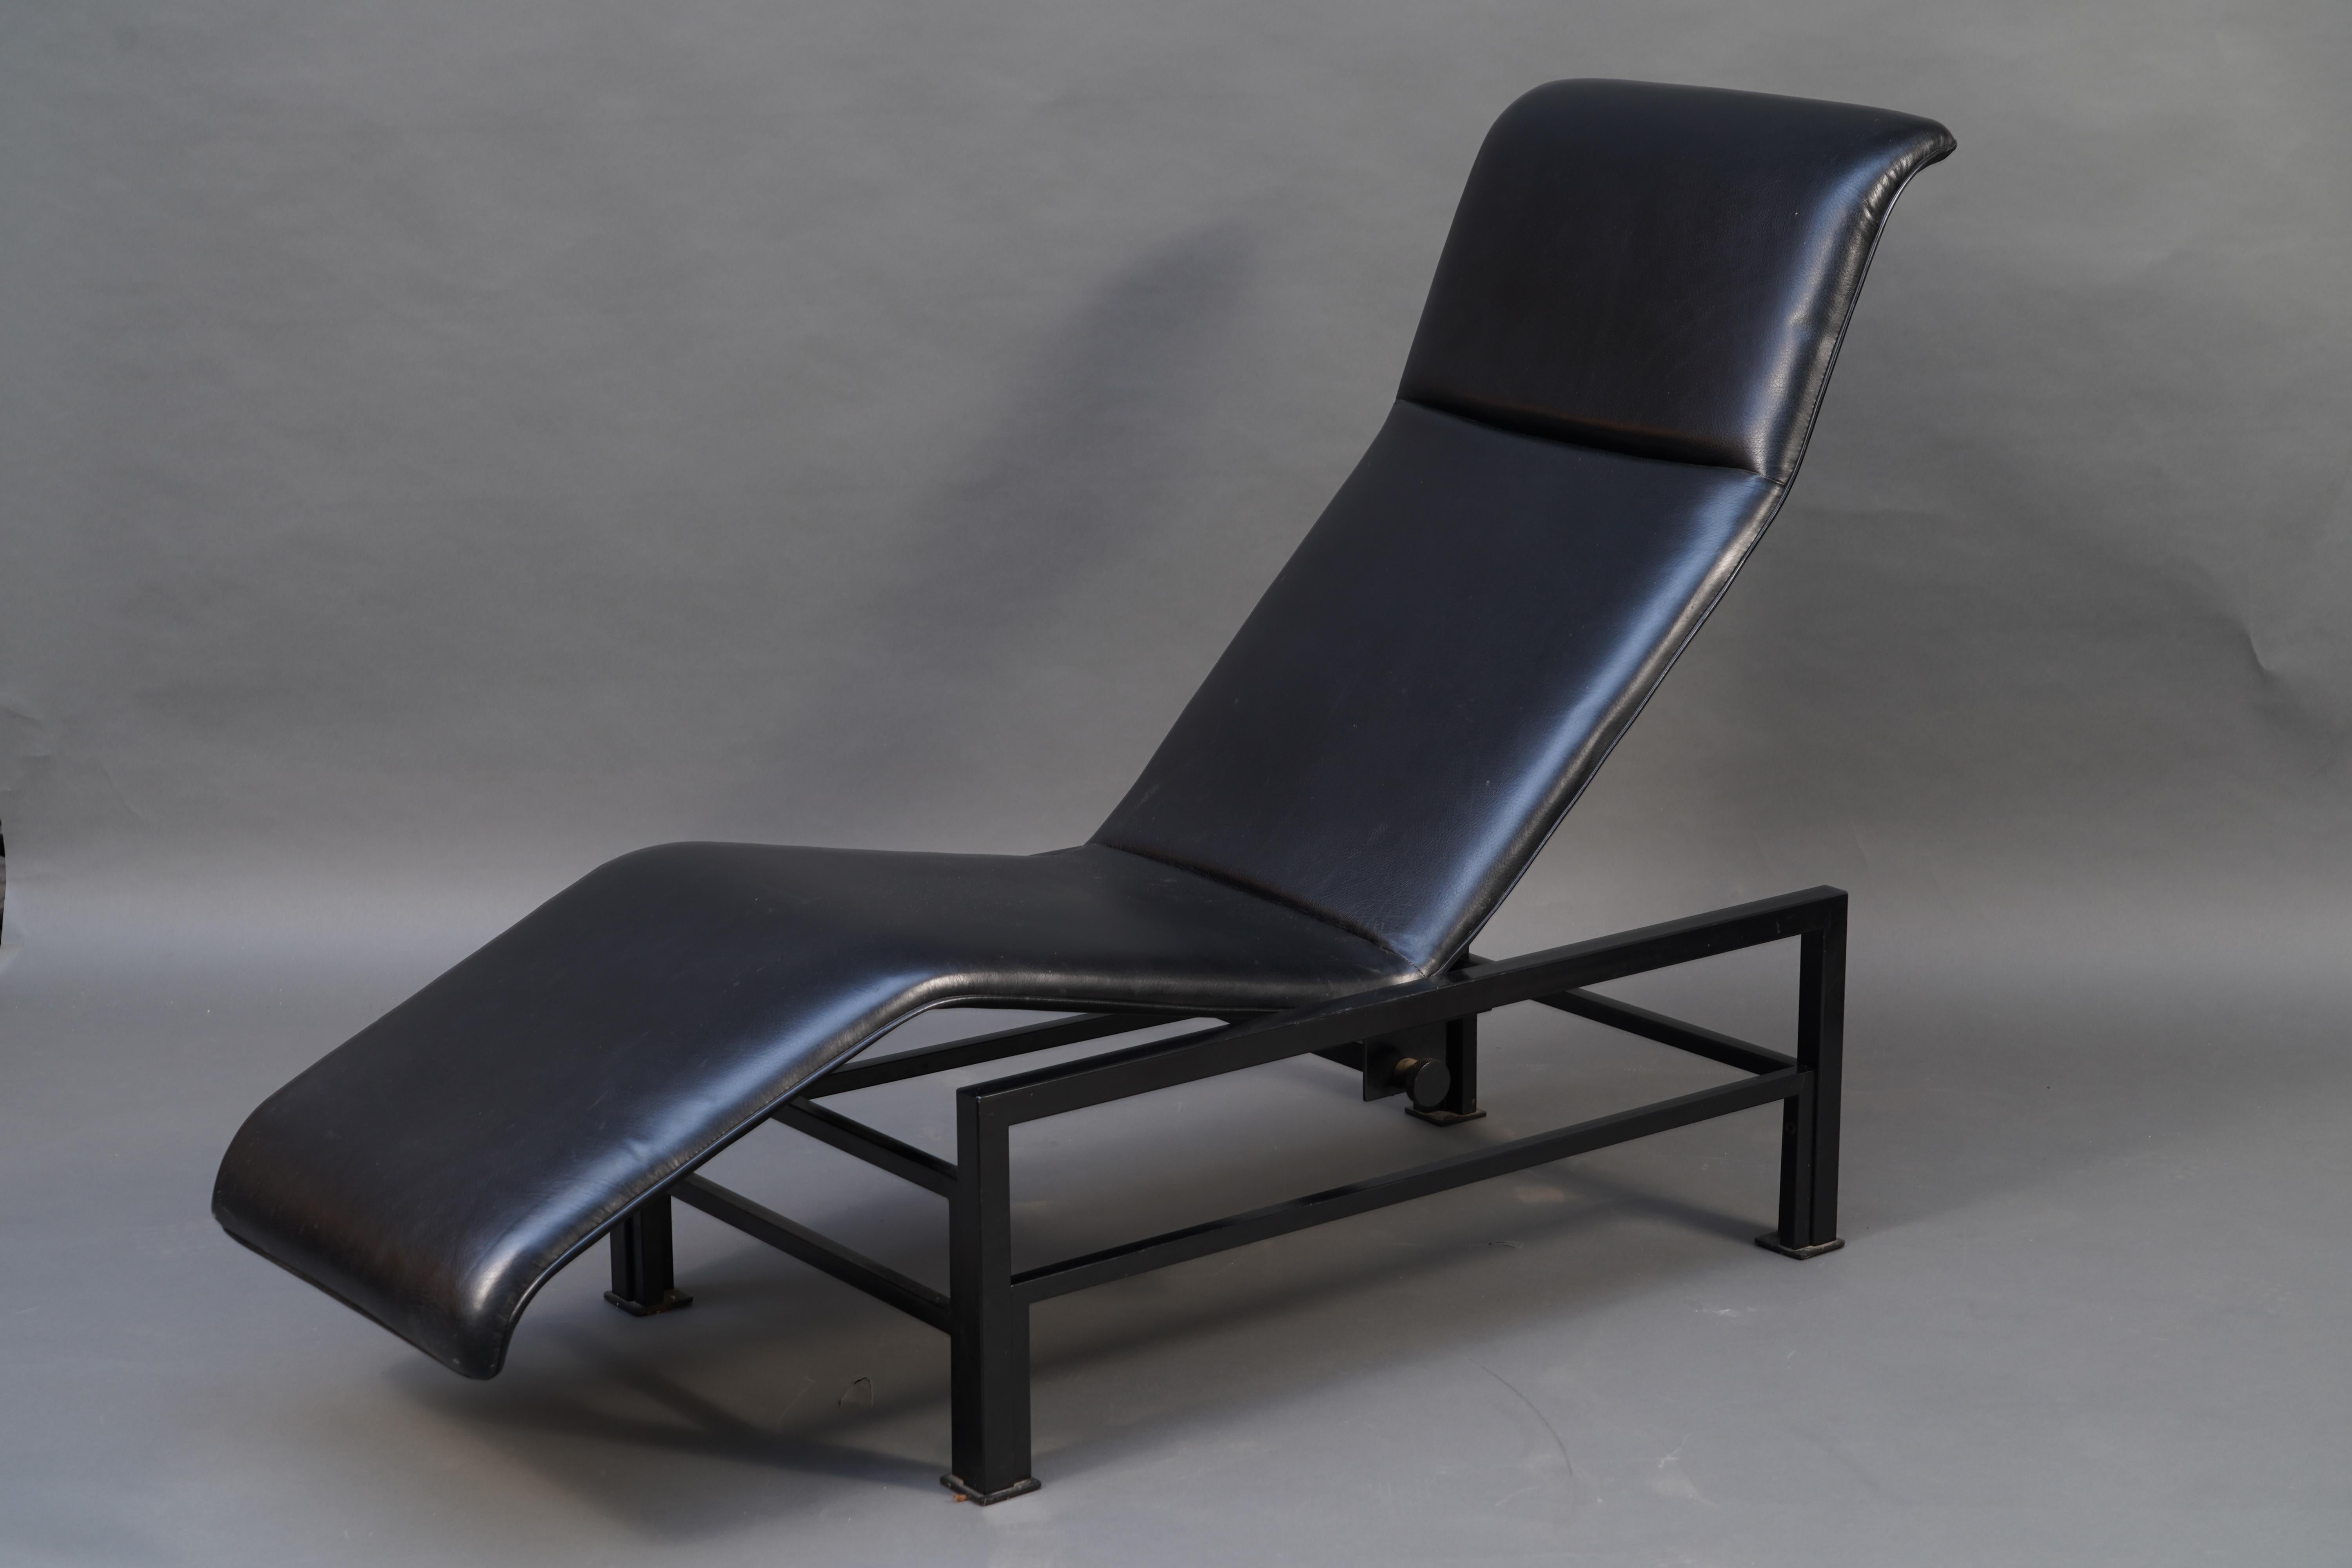 Rare lounge chair in black leather and black lacquered metal, with tilt adjustment system using a locking screw. This lounge chair designed by Samuel Coriat began in 1986 and benefits from exceptional comfort and design.

Artelano : Founded by